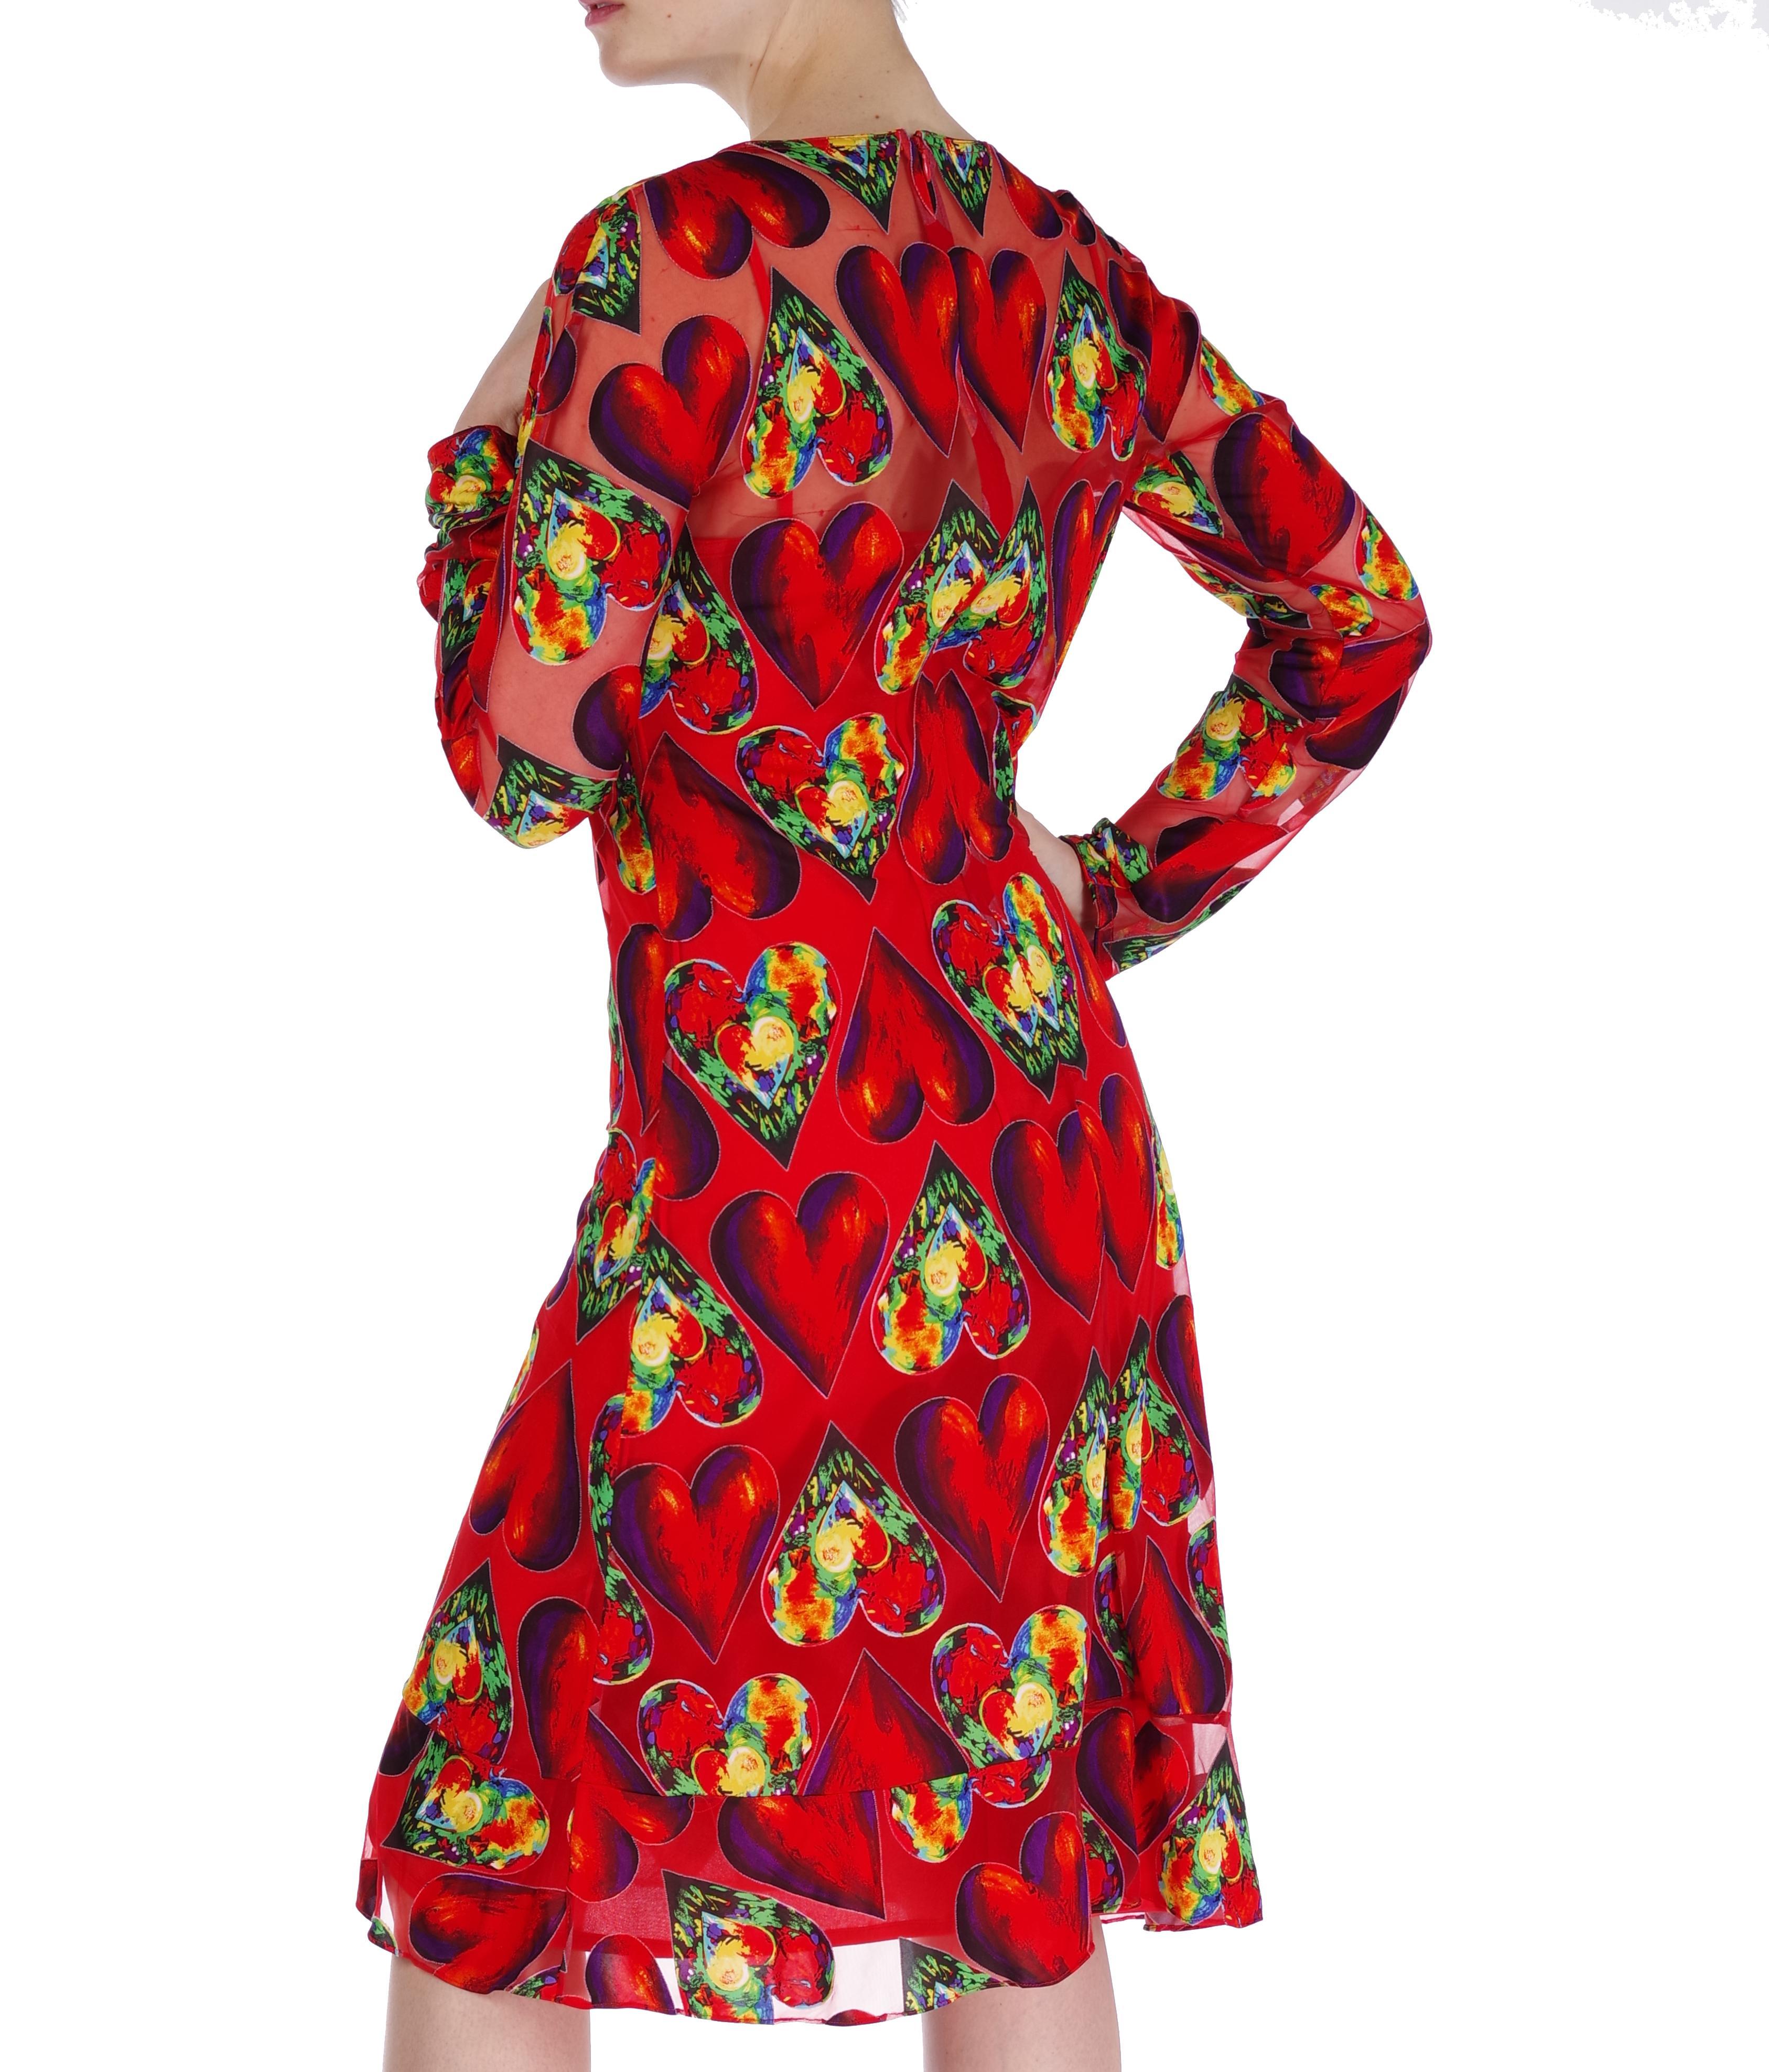 Women's S/S 1997 Look#30 Gianni Versace Couture Heart Print Red Dress For Sale